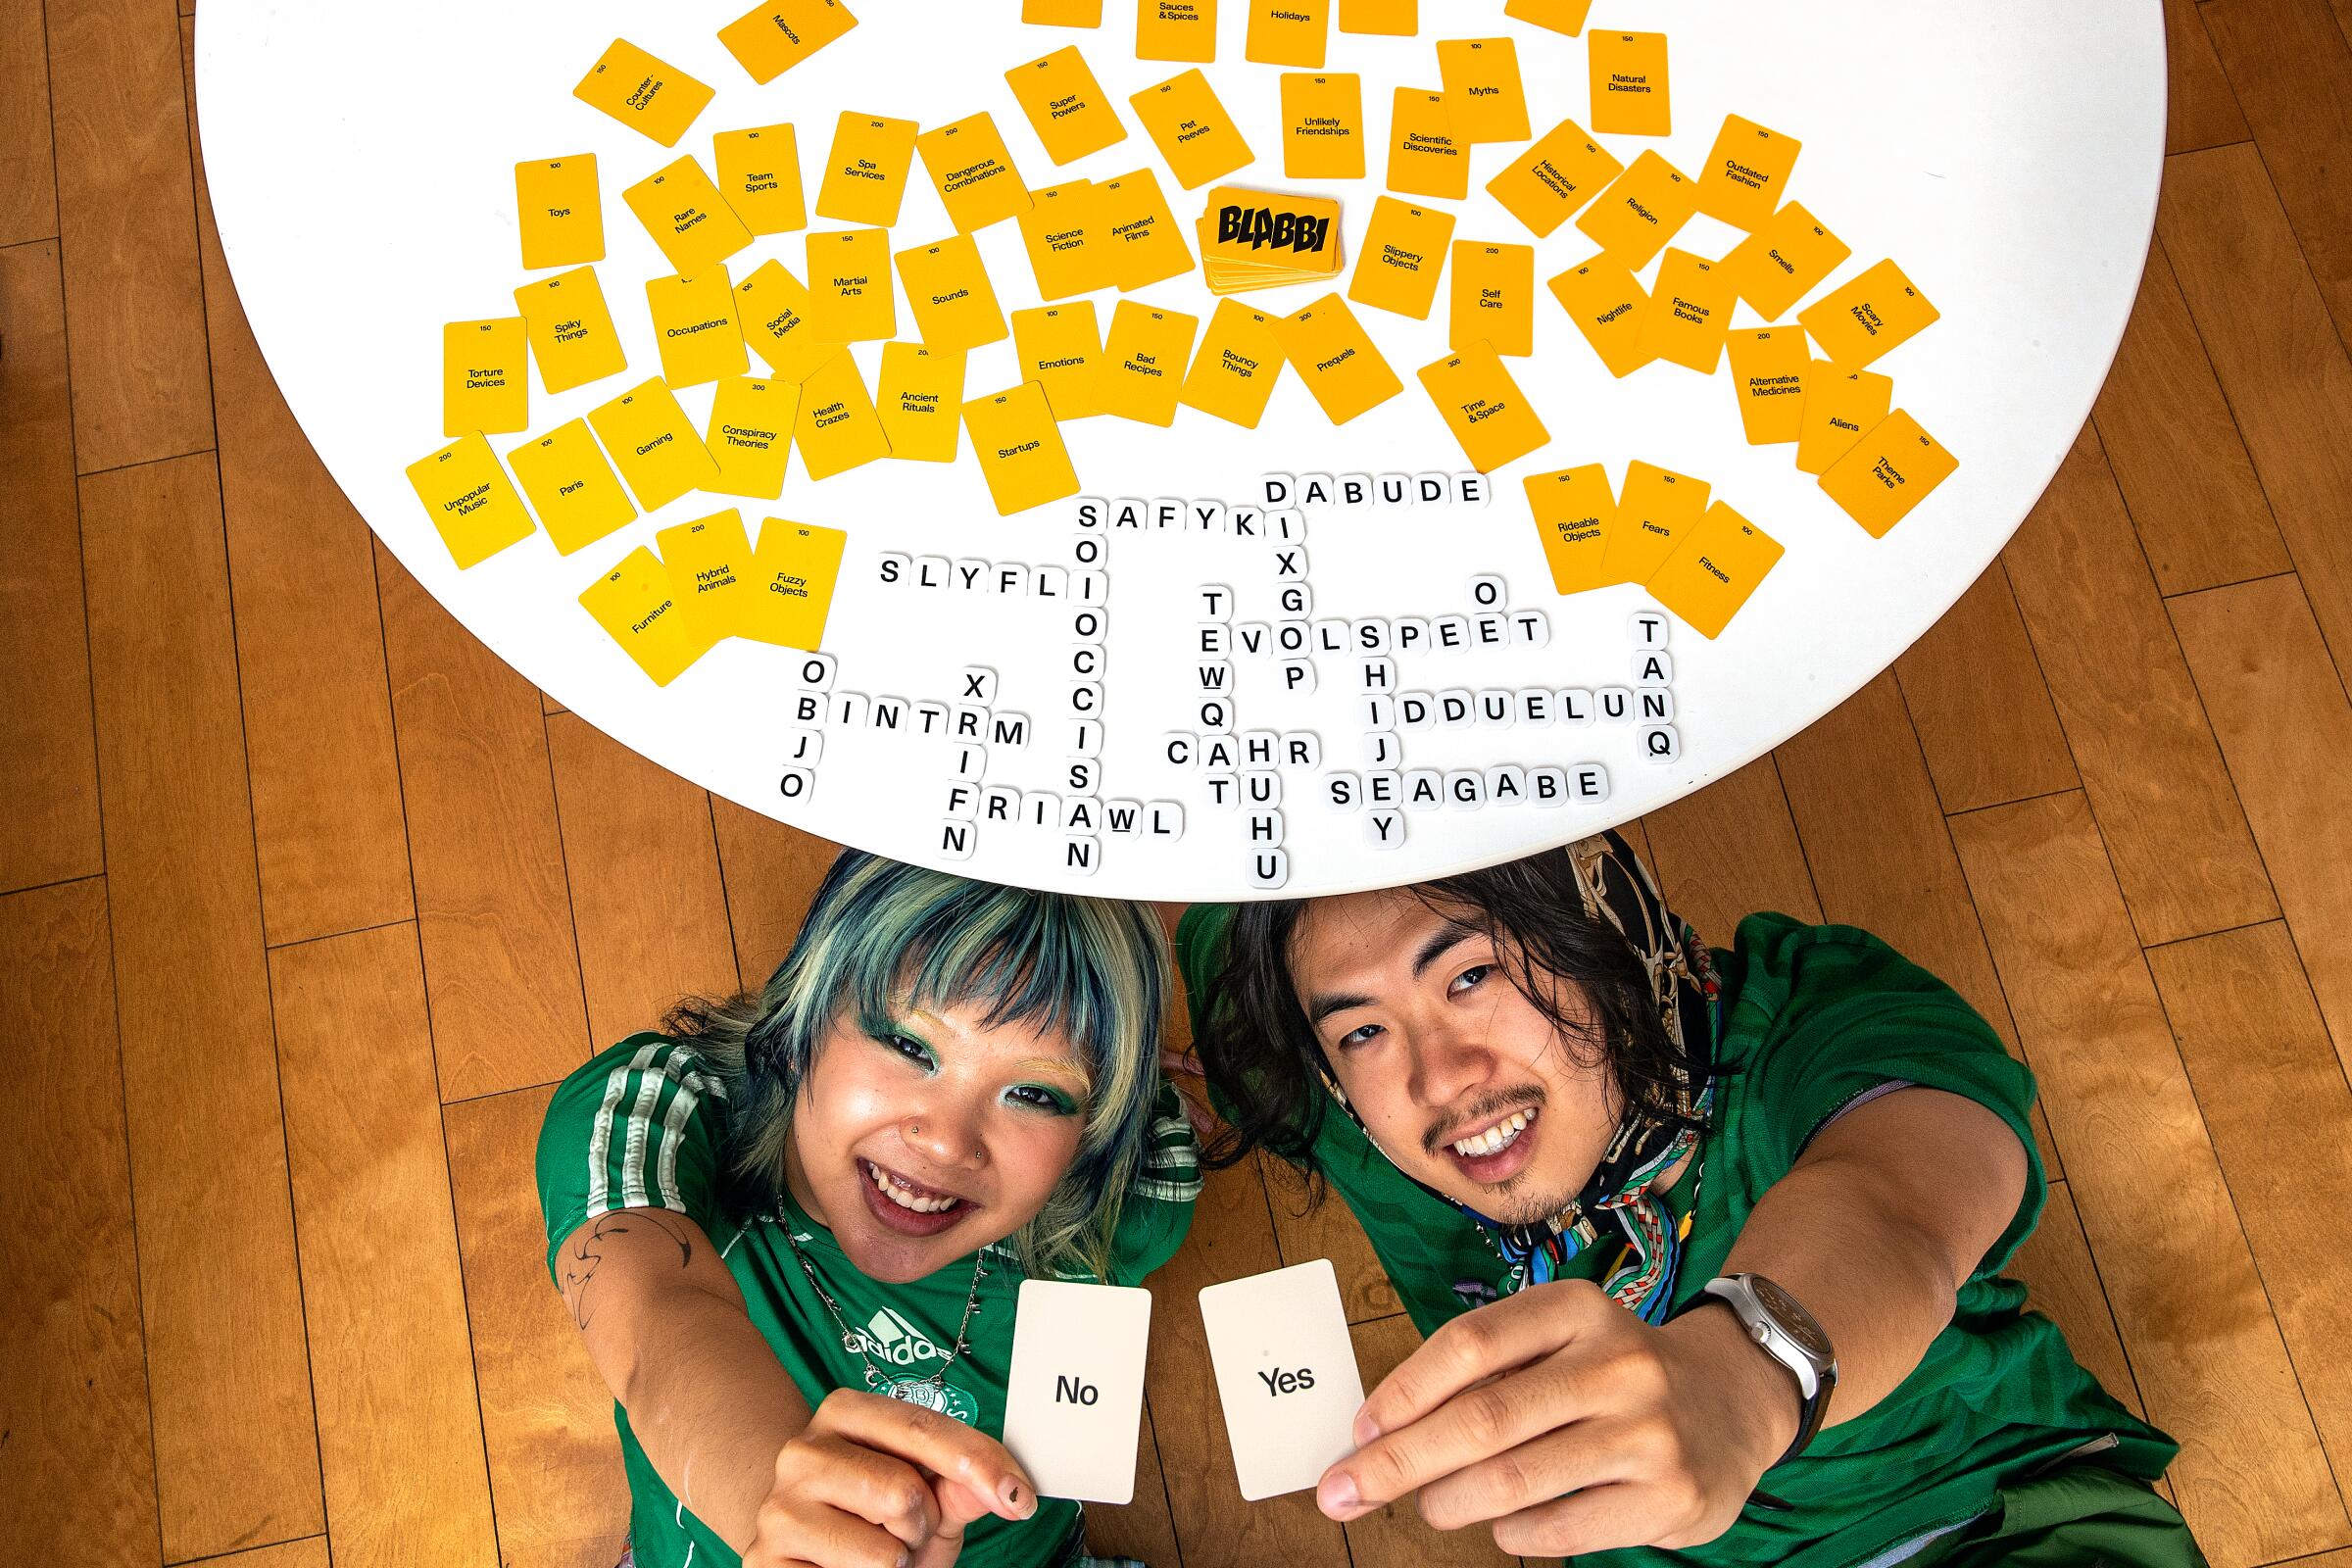 A woman and a man holding up cards that say "no" and "yes" pose under a table where the board game Blabbi is laid out.